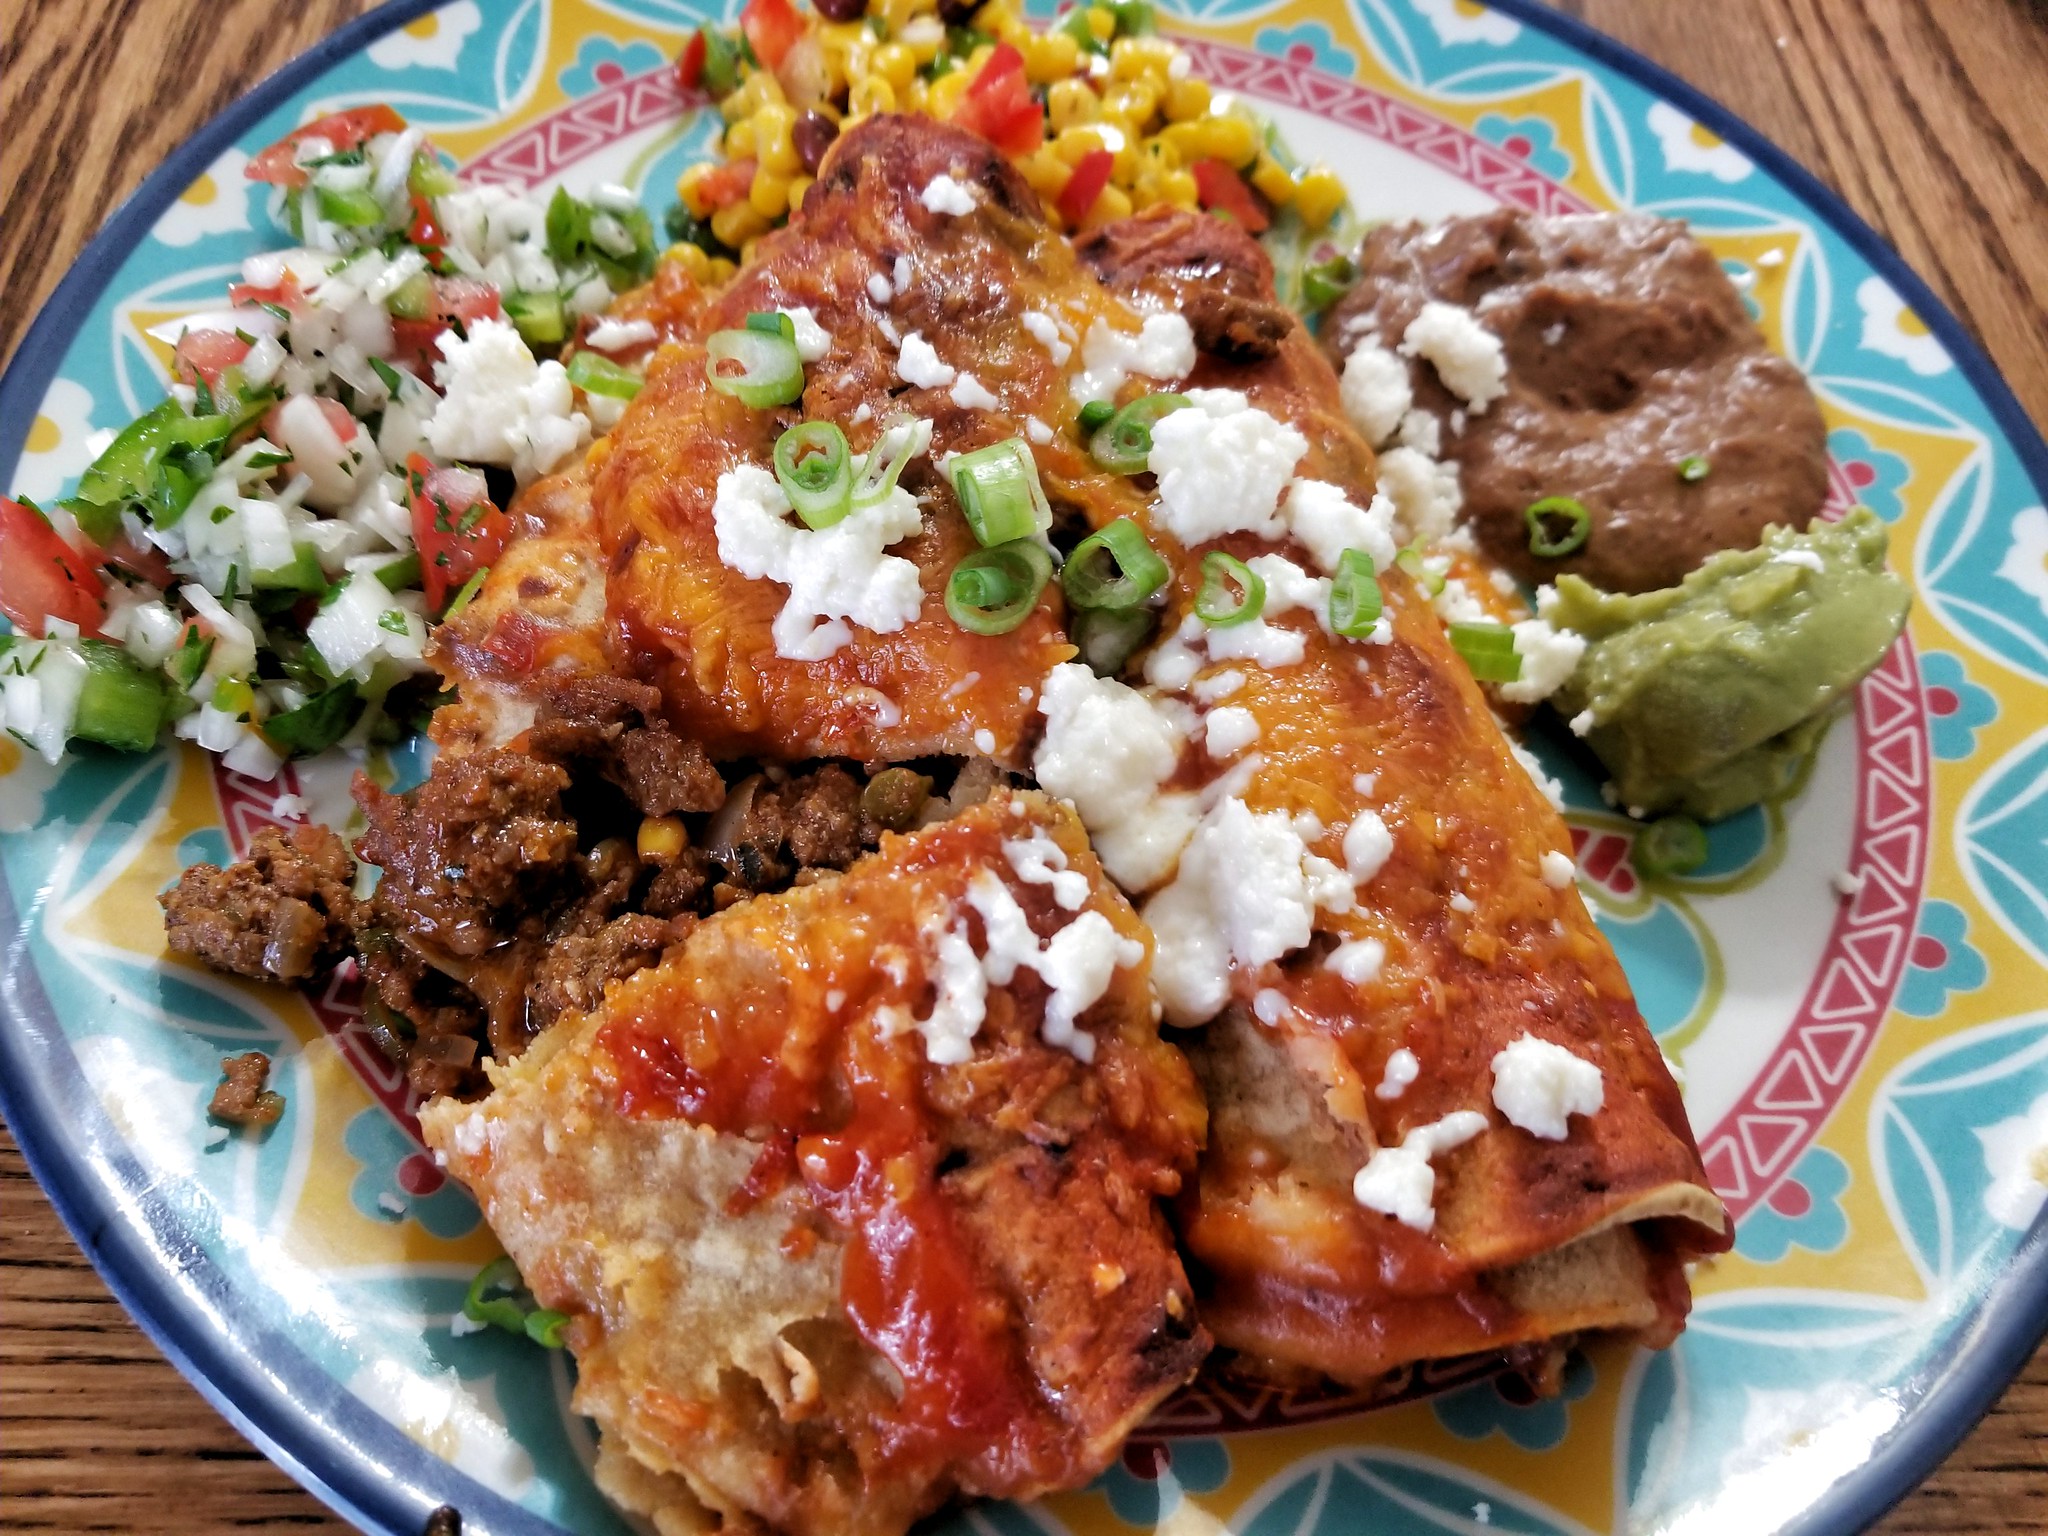 Plate of enchiladas at a Mexican restaurant. 